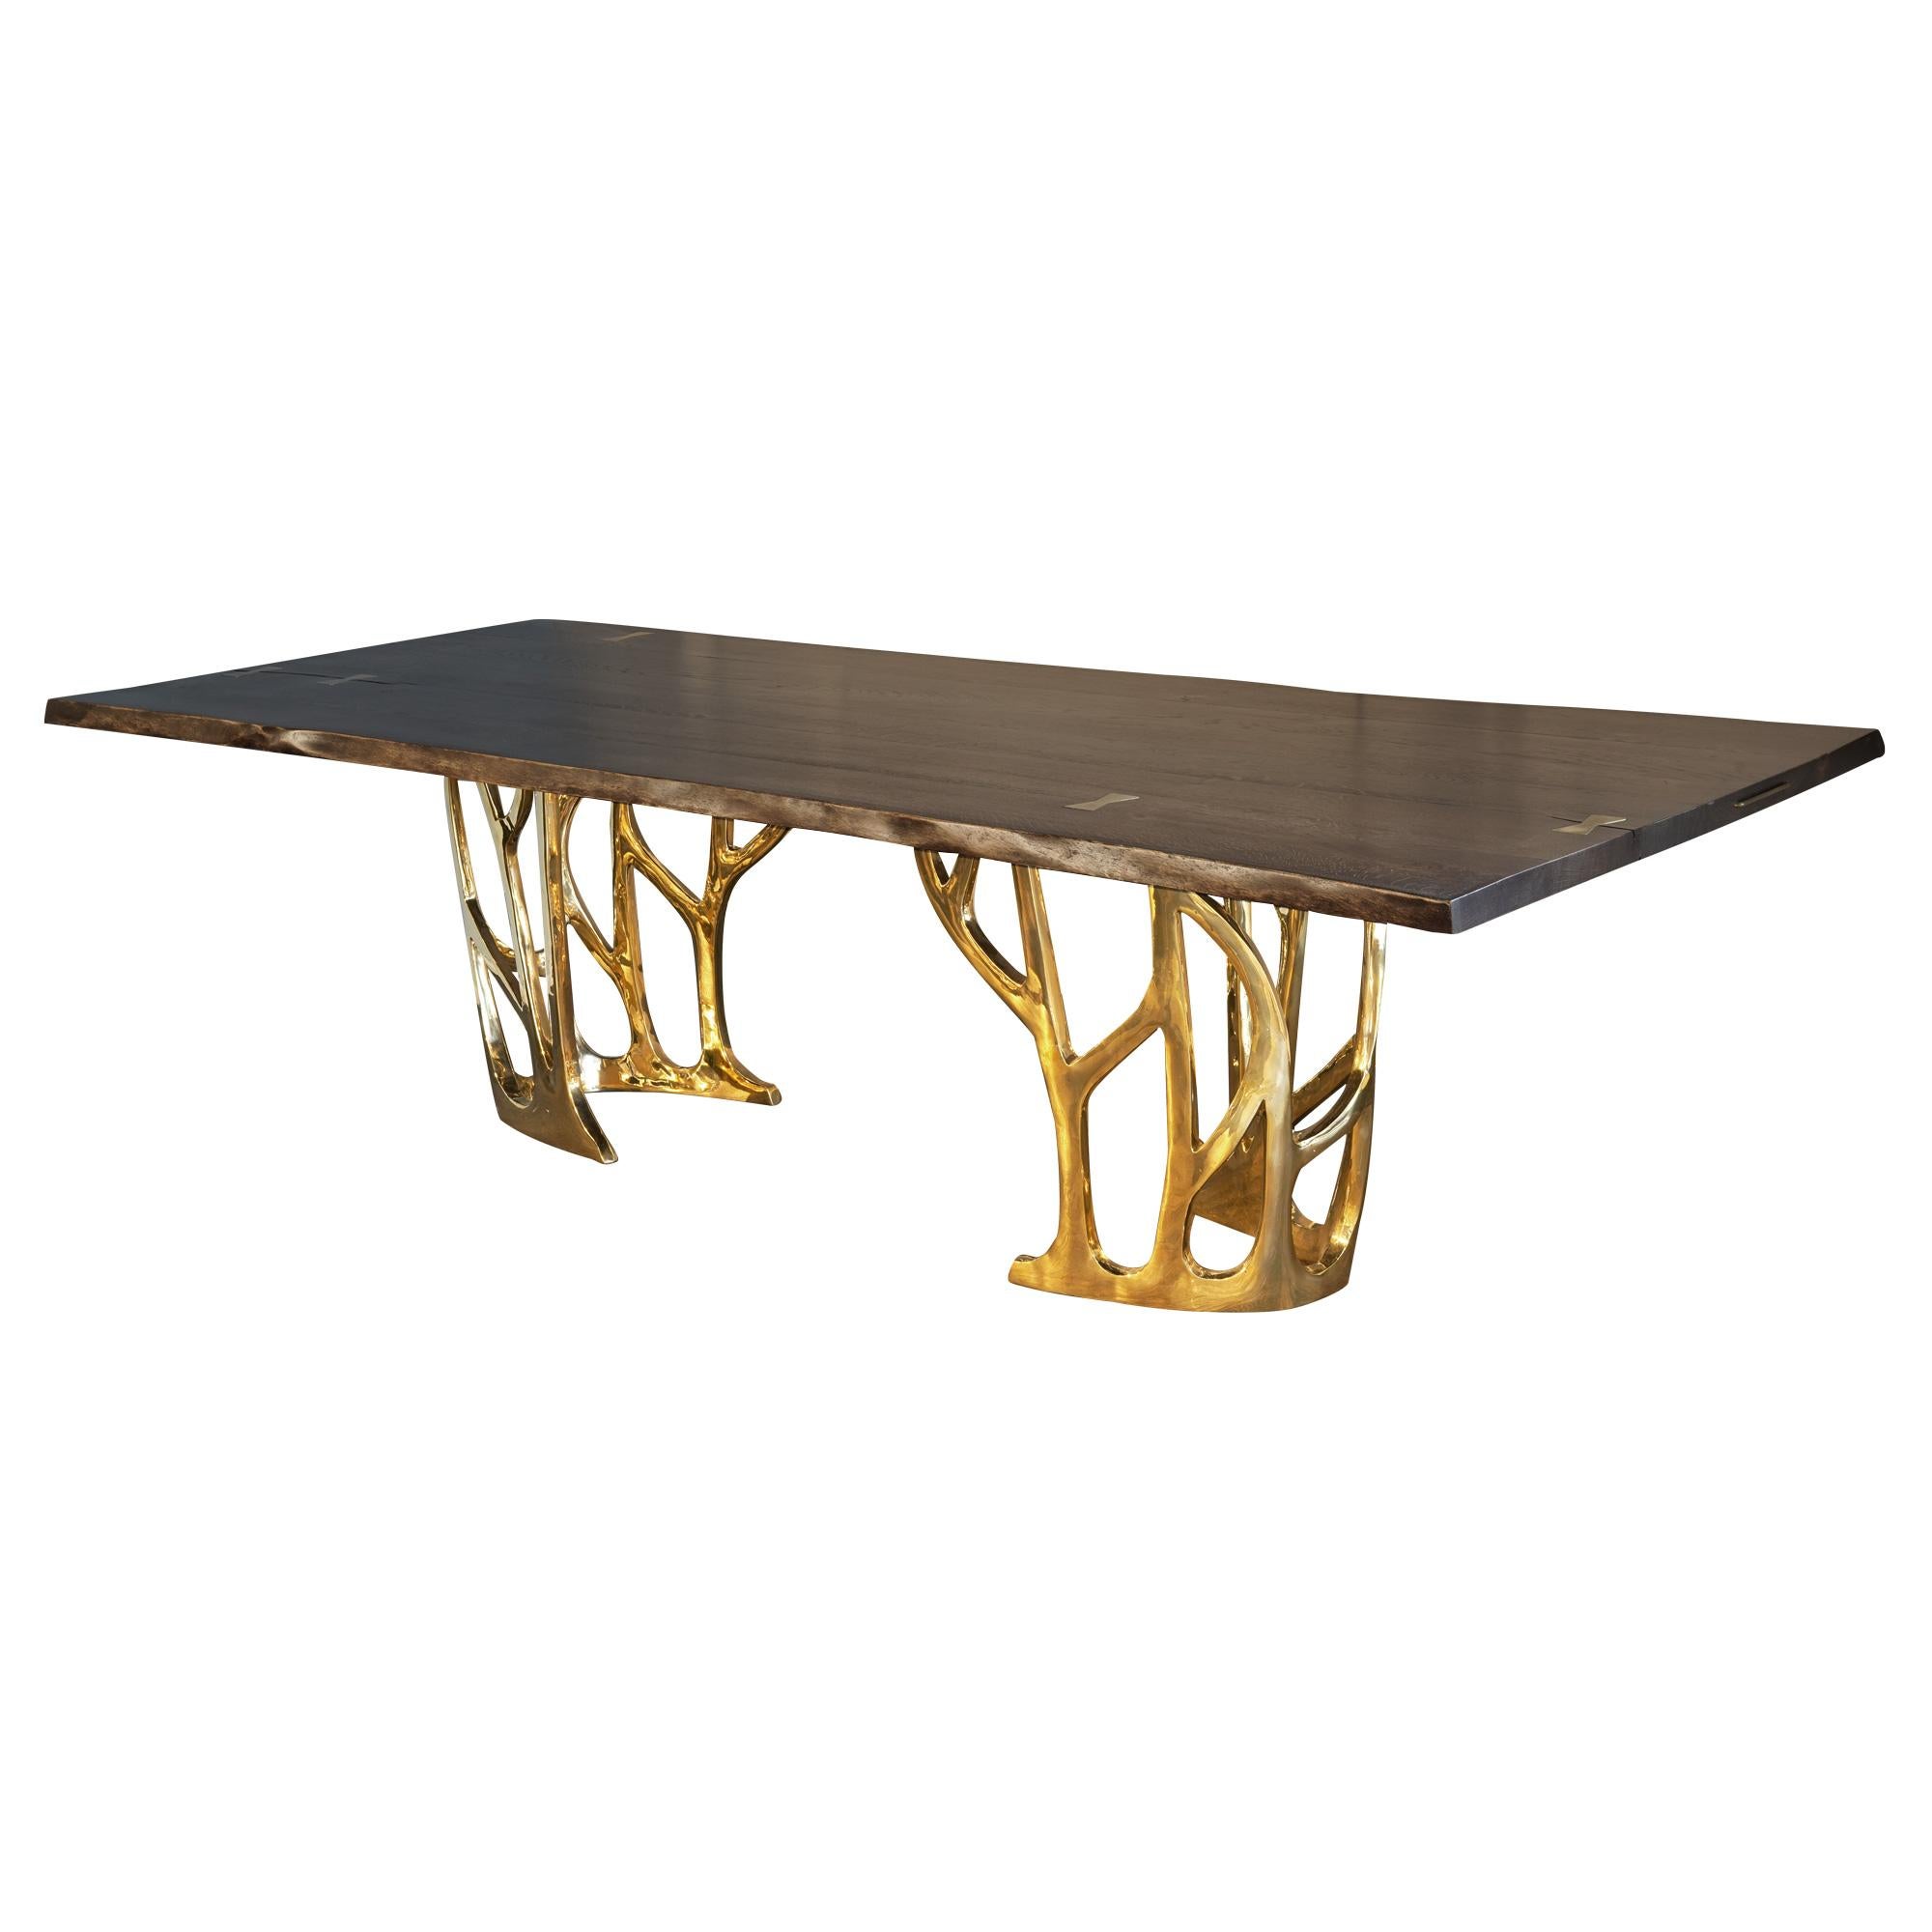 Dining table with cast bronze base and live edge hardwood, stone, concrete or glass top.
Can be custom sized and finished.